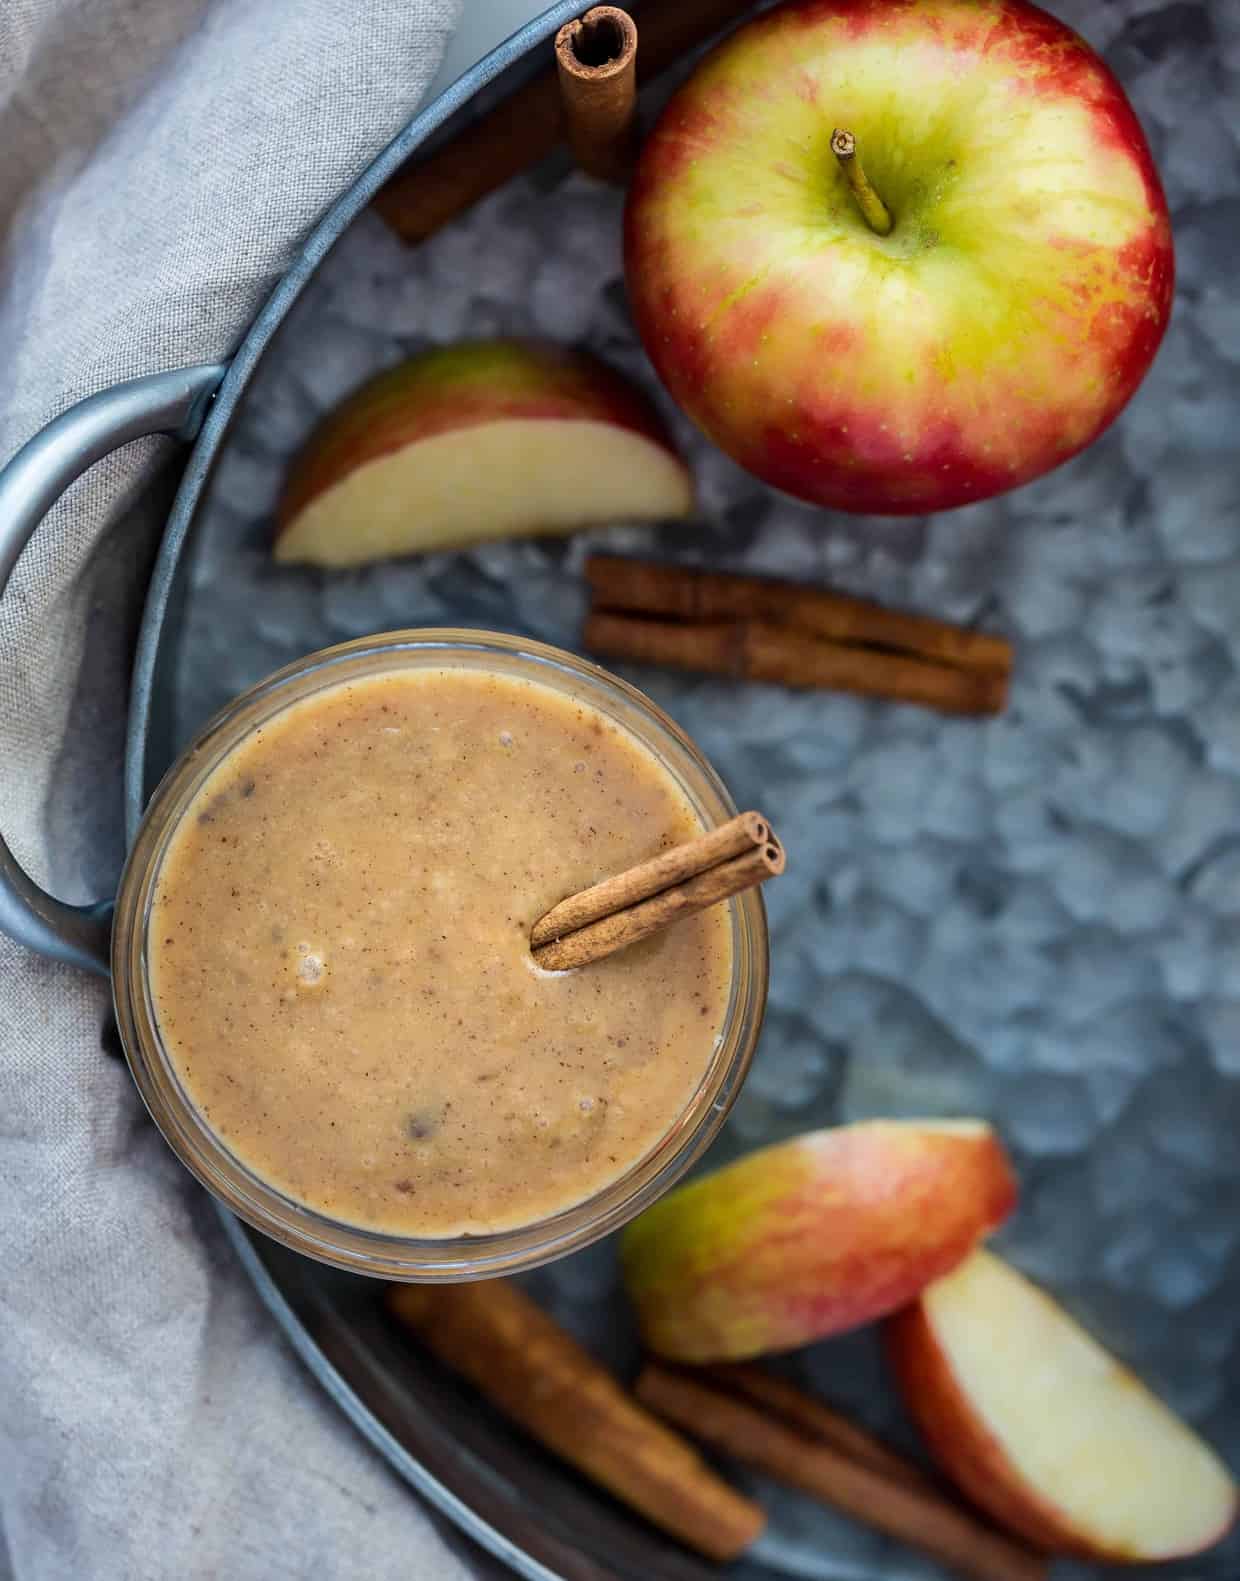 A jar of caramel apple dip with a cinnamon stick in the dip.